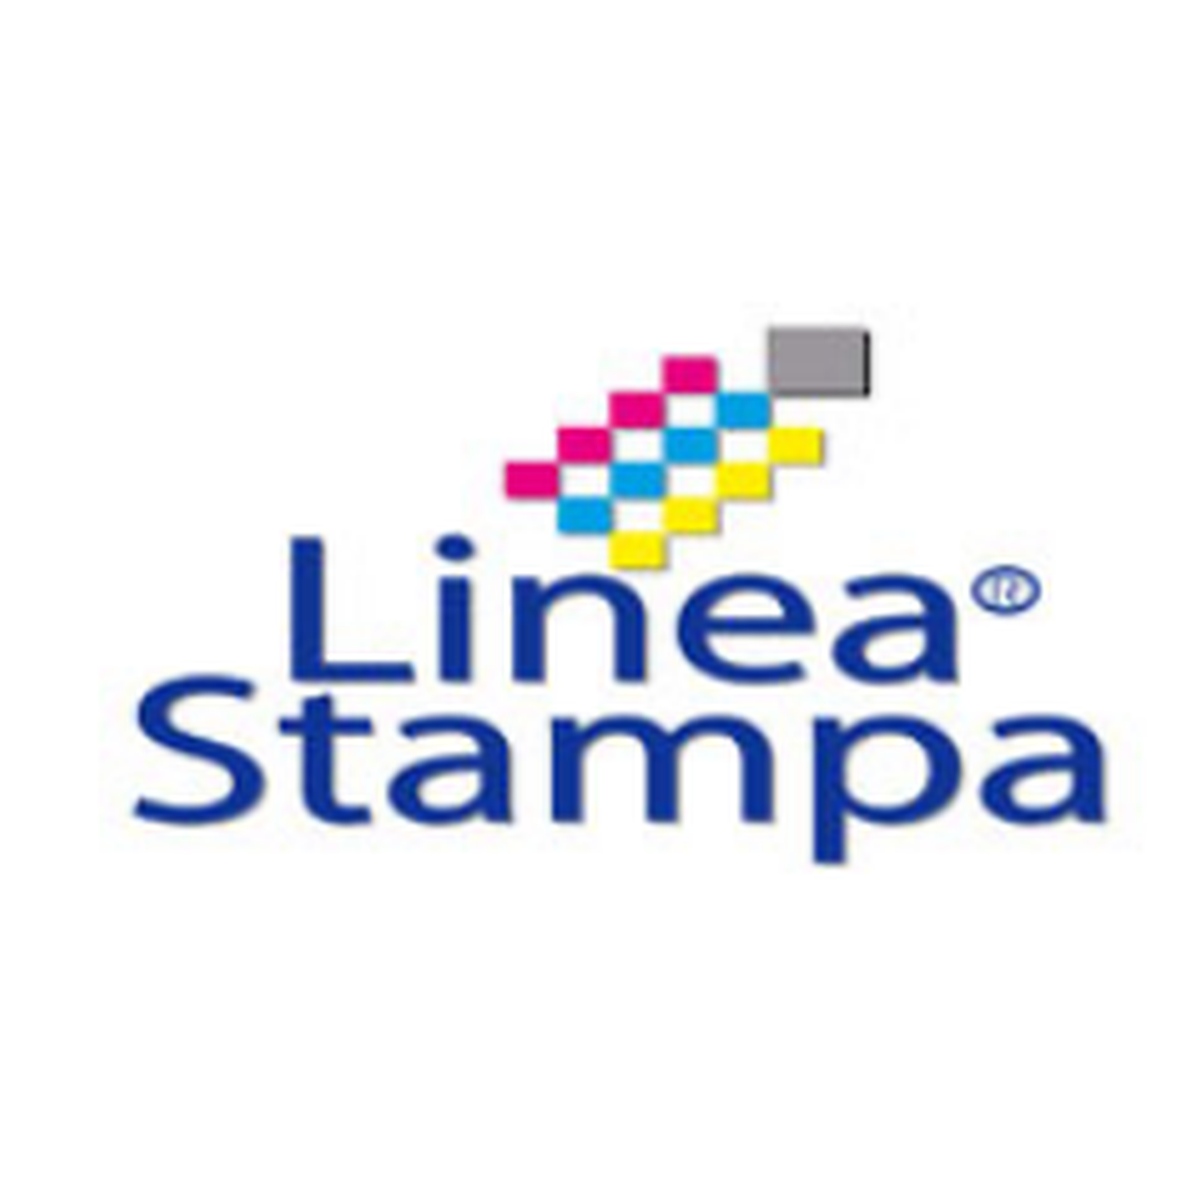 Linea stampa